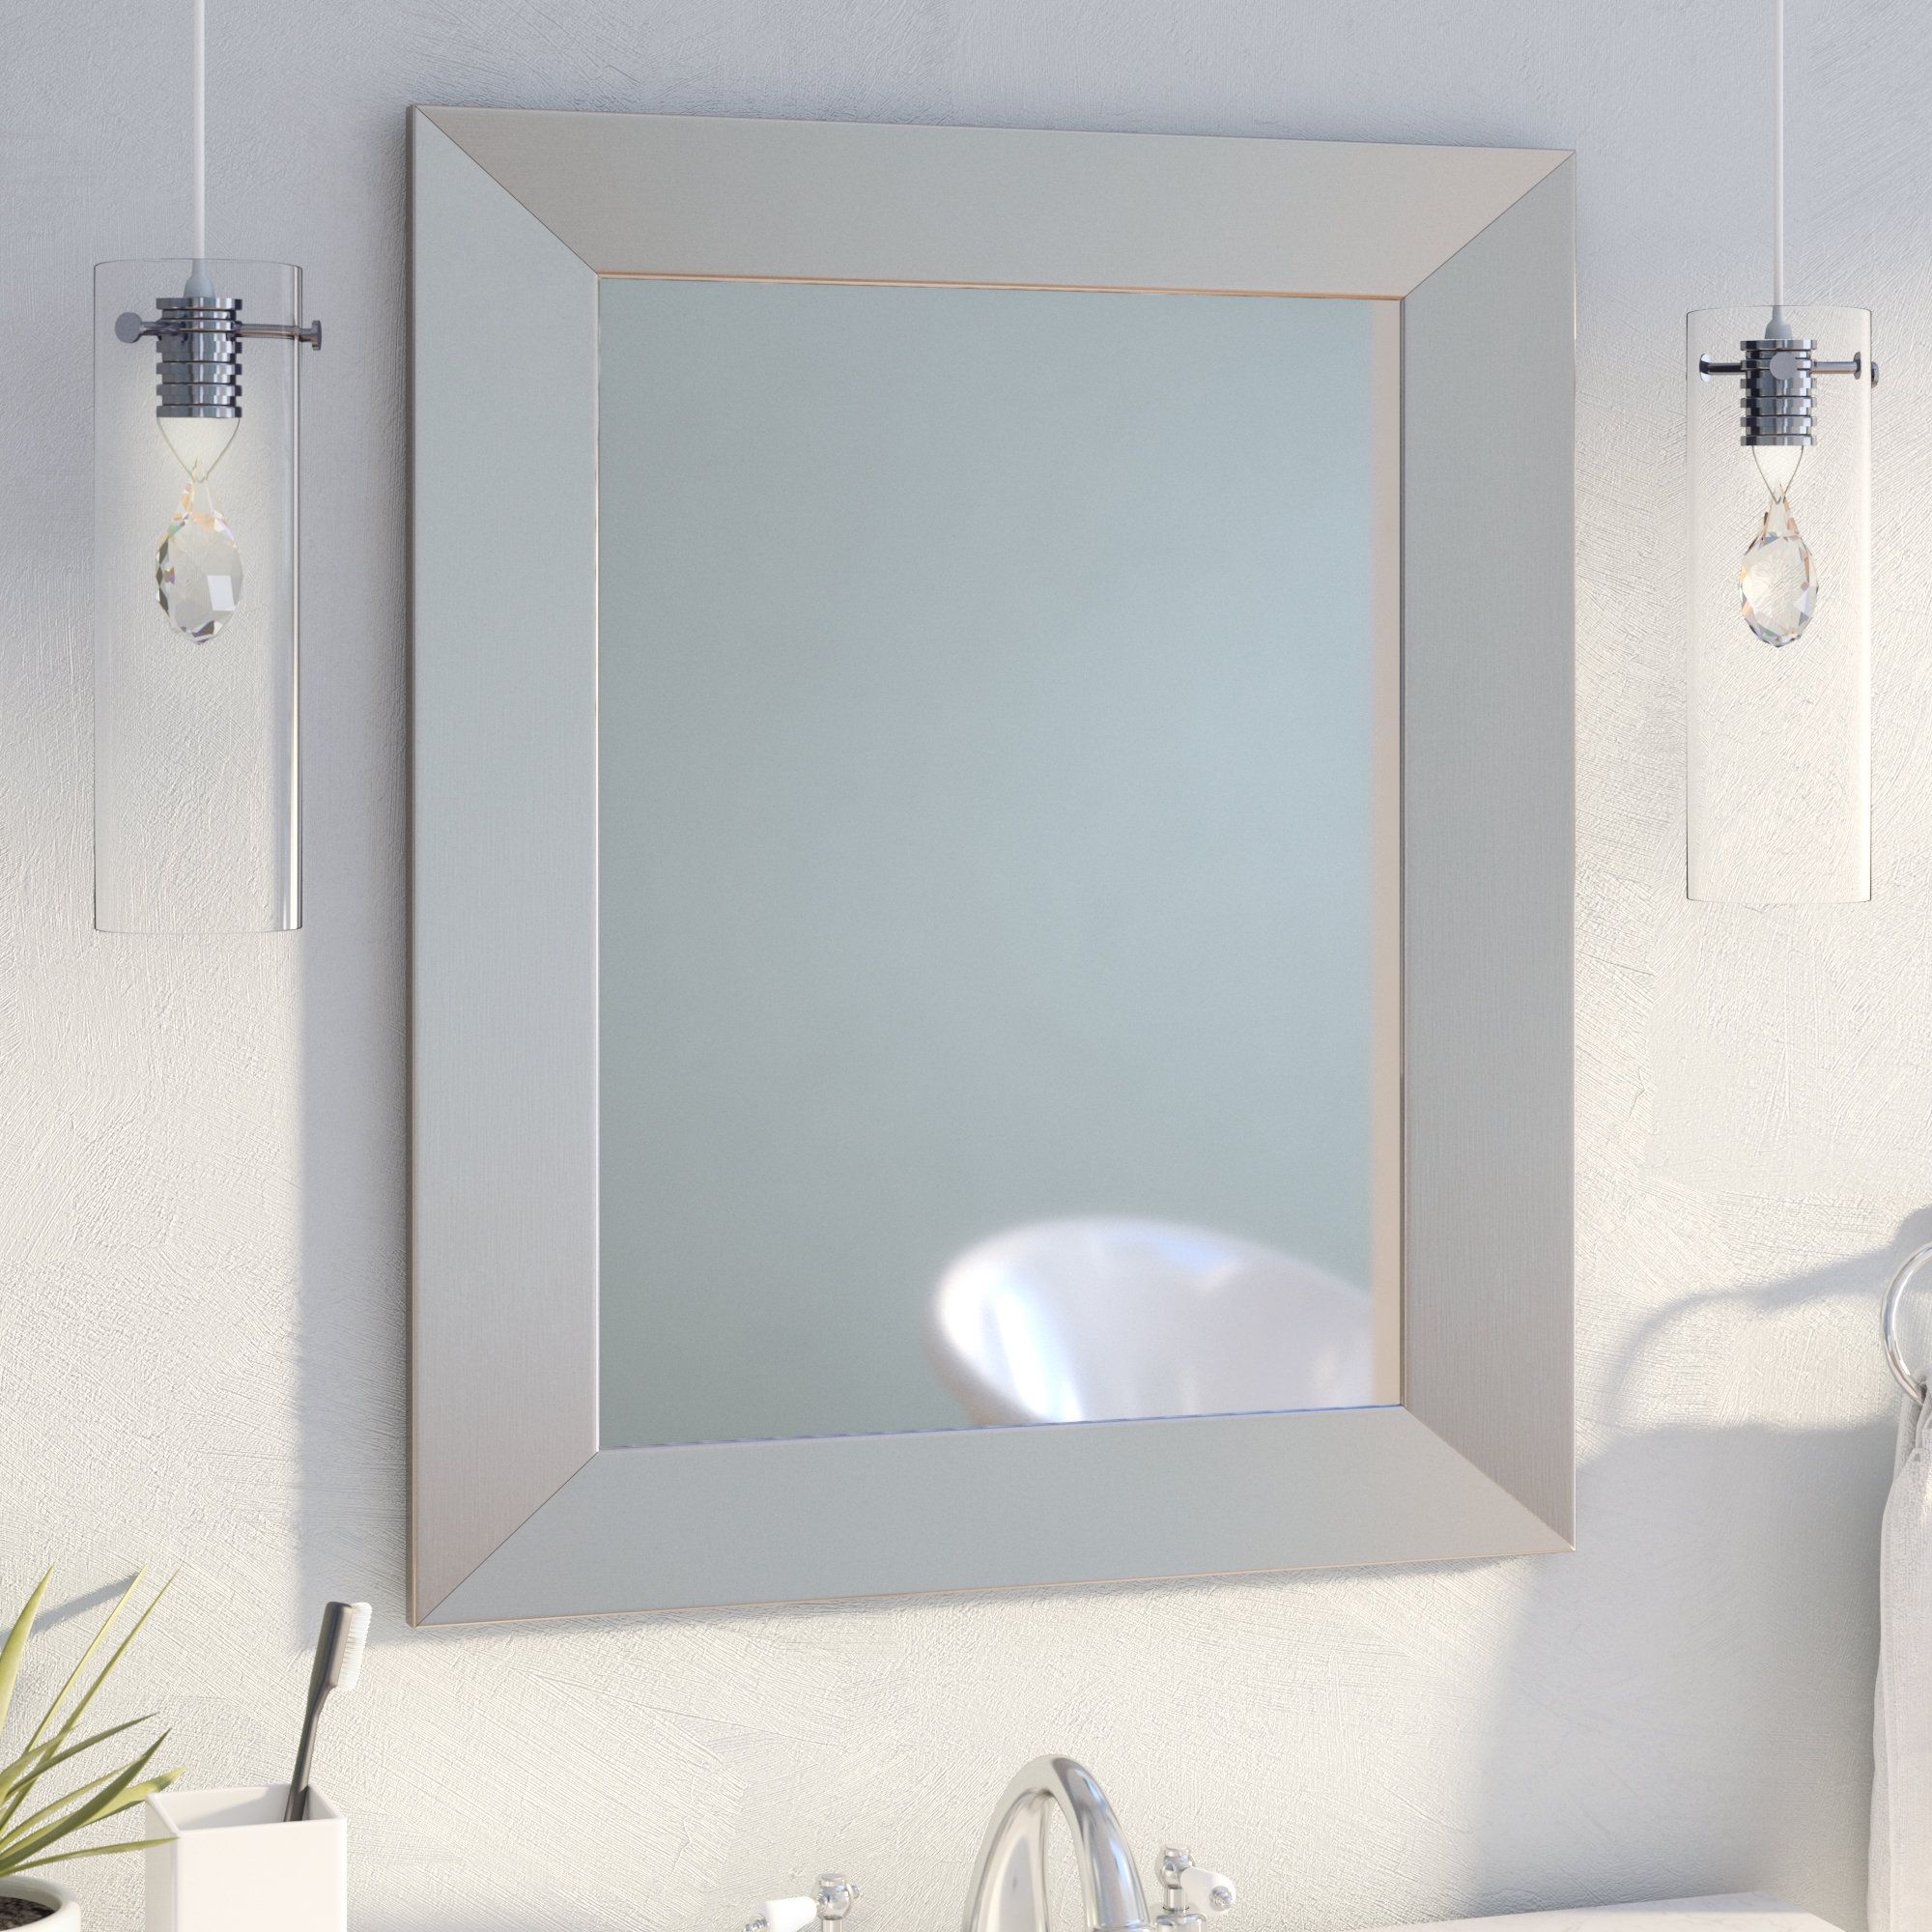 Contemporary Framed Wall Mirror | Wayfair For Eriq Framed Wall Mirrors (View 12 of 20)